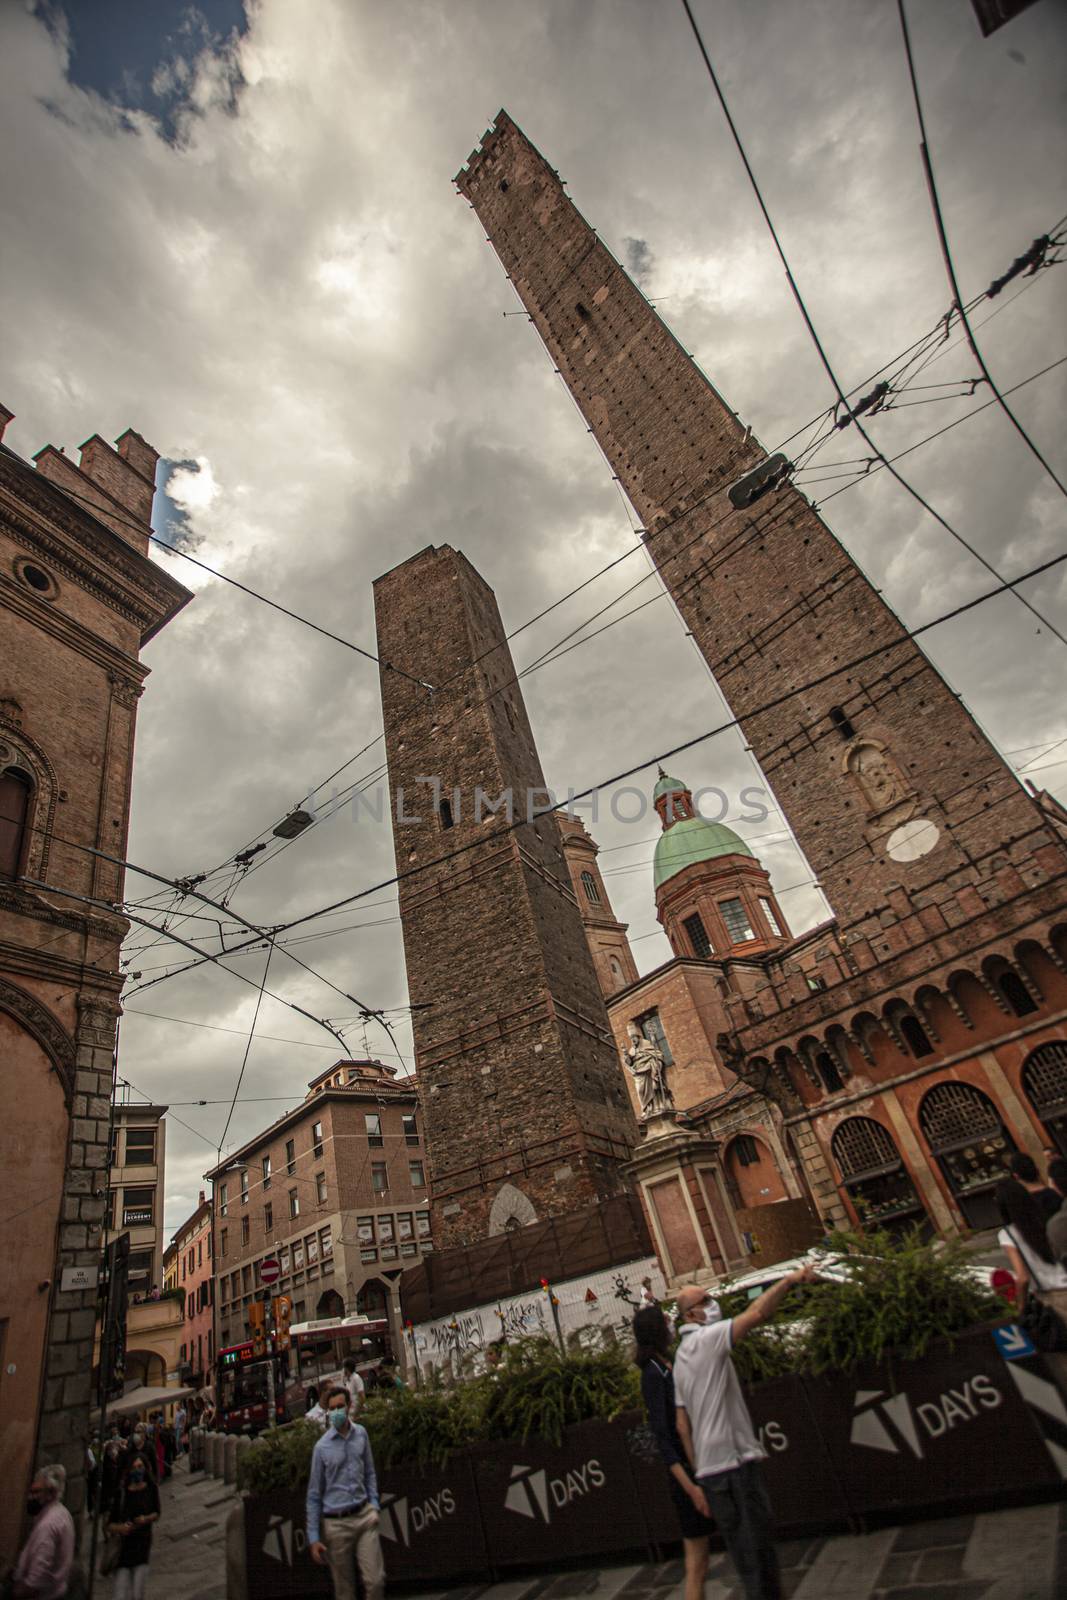 Asinelli tower in Bologna, Italy 8 by pippocarlot